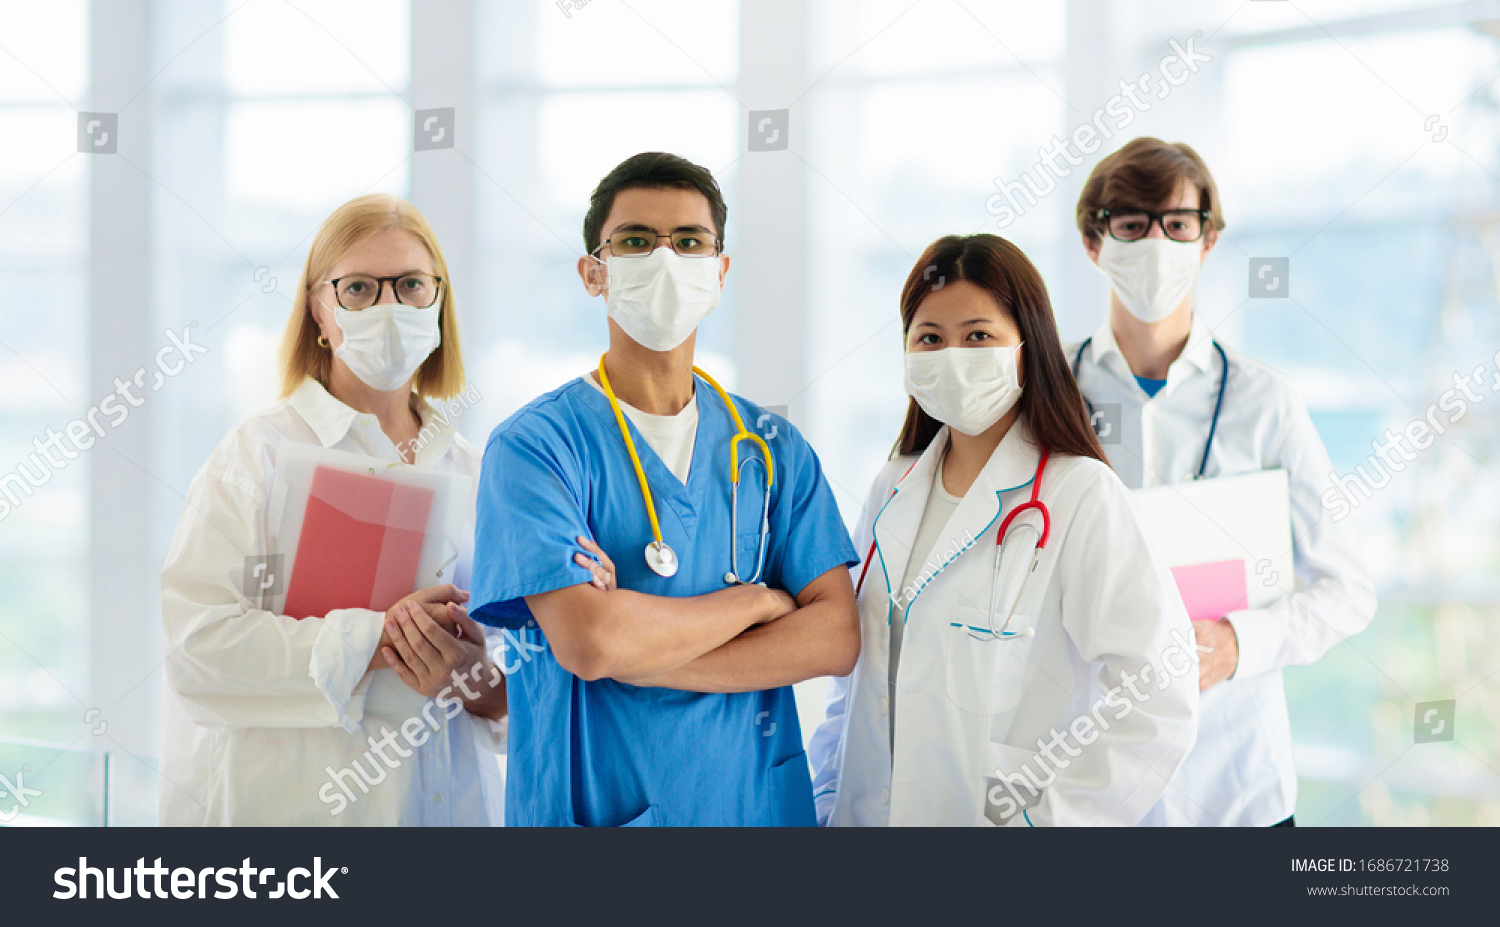 International doctor team. Hospital medical staff. Mixed race Asian and Caucasian doctor and nurse meeting. Clinic personnel wearing face mask and stethoscope. Coronavirus outbreak. #1686721738